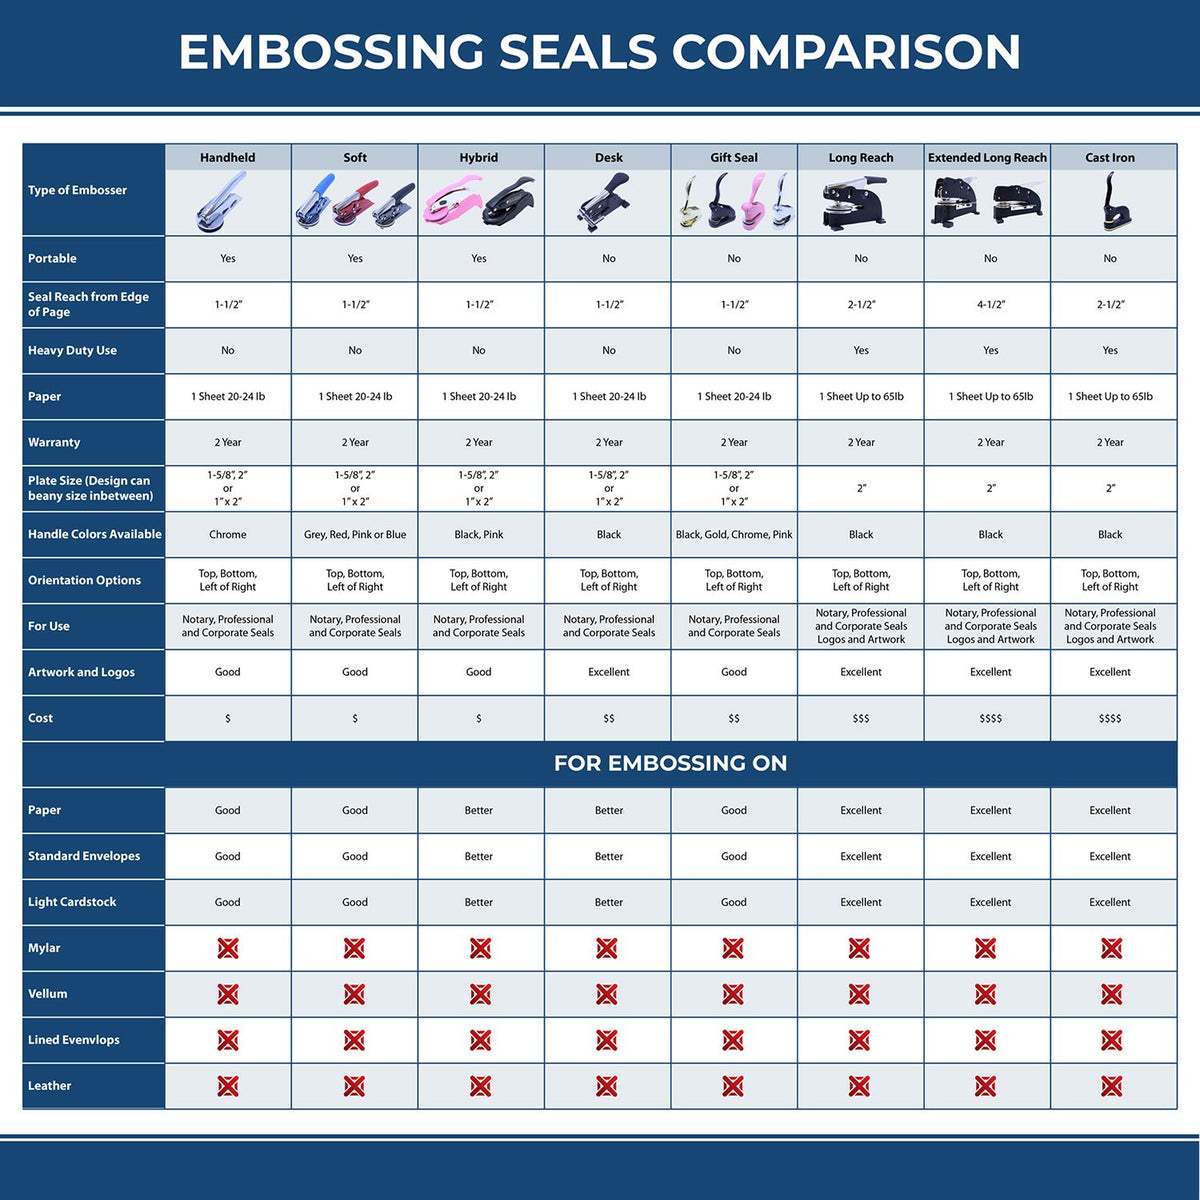 A comparison chart for the different types of mount models available for the State of New York Extended Long Reach Geologist Seal